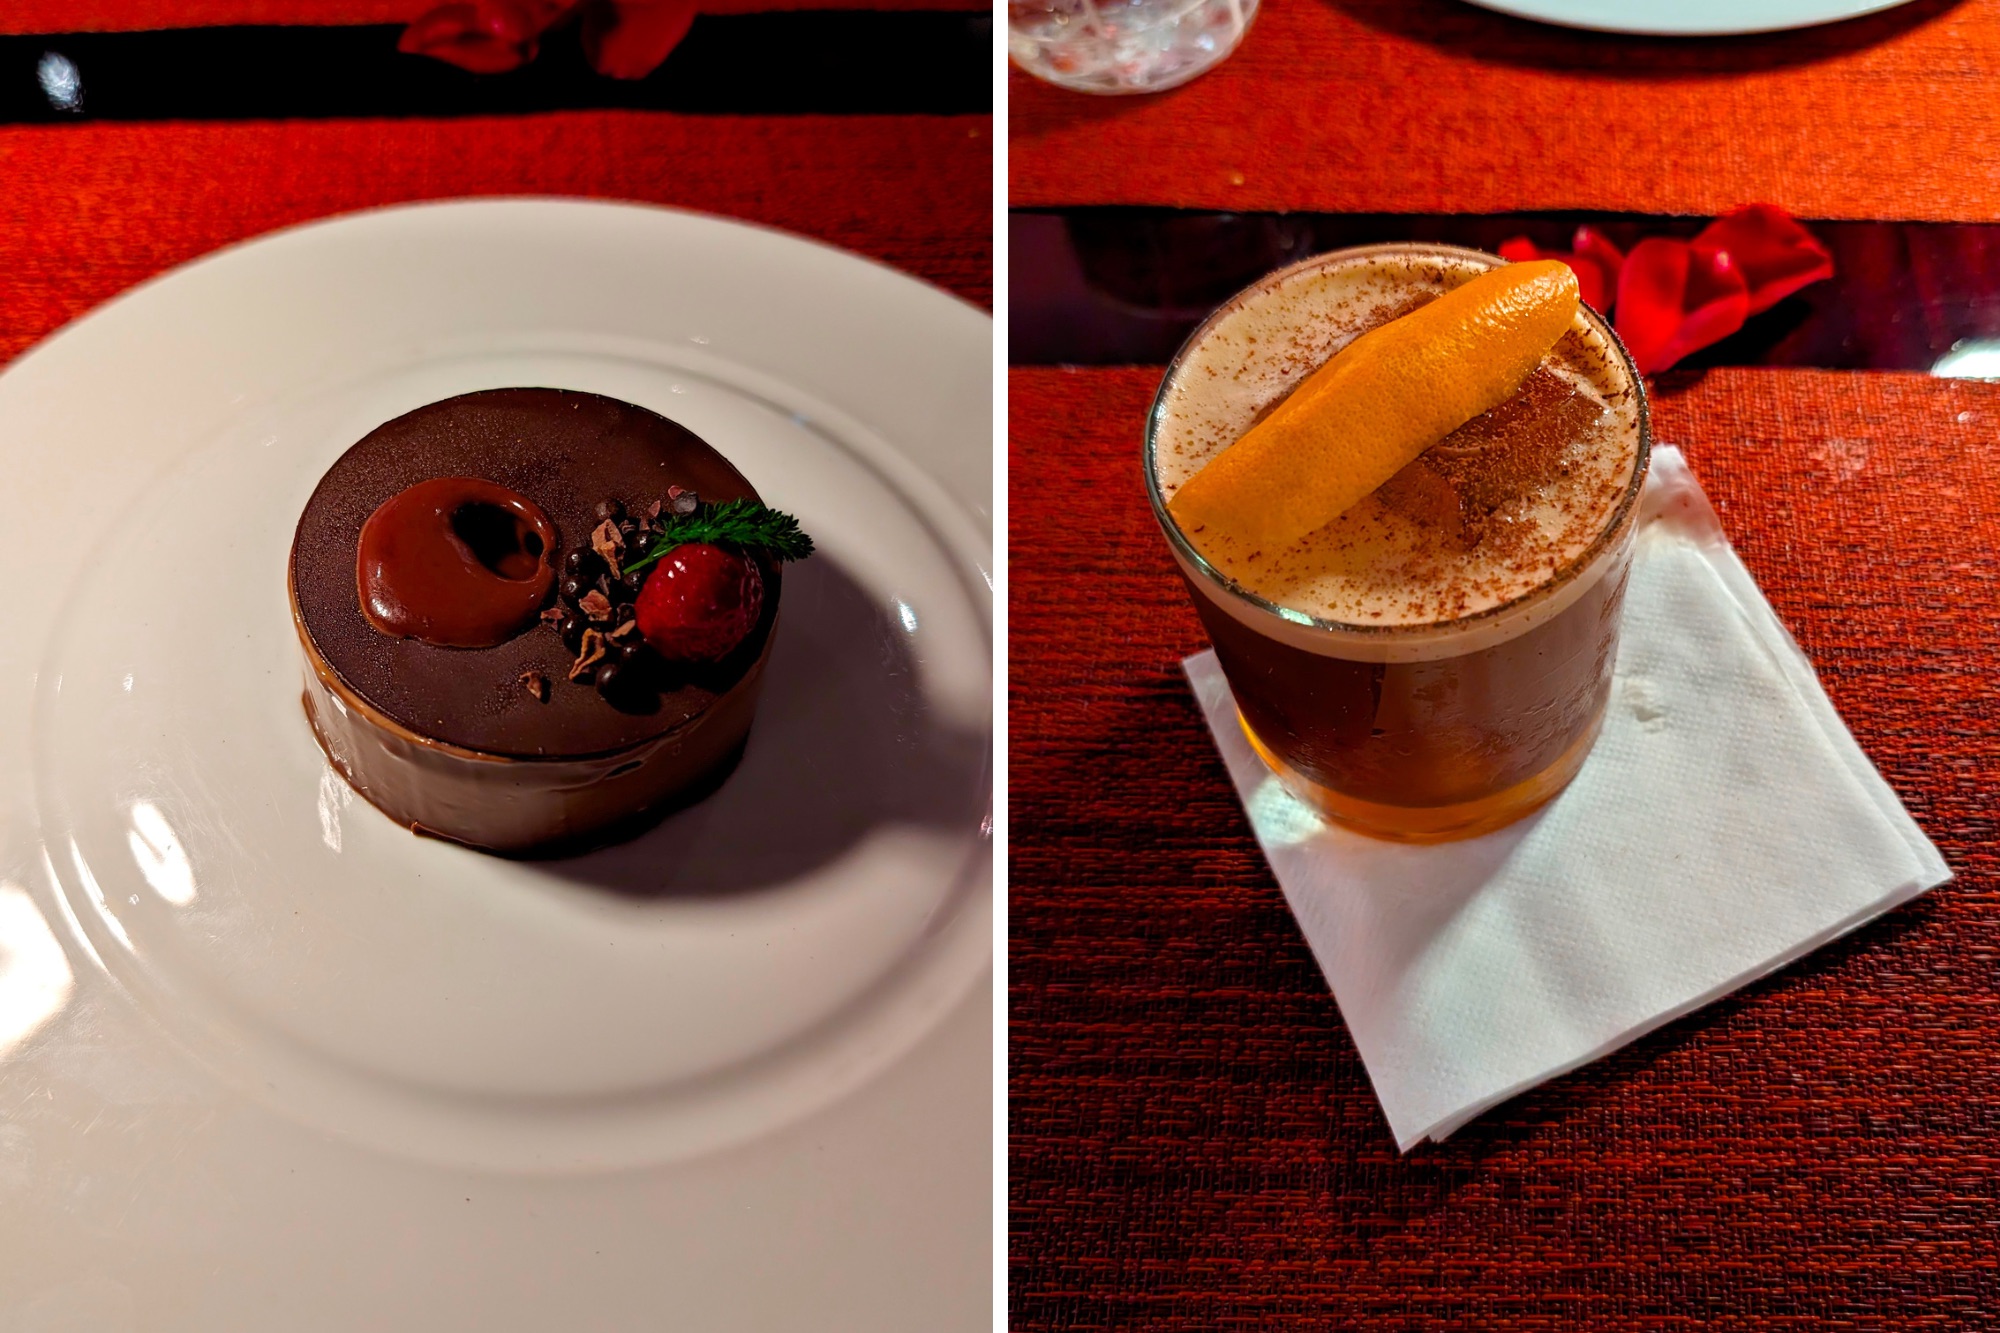 A dish of the famous Choco-L8 and a cocktail